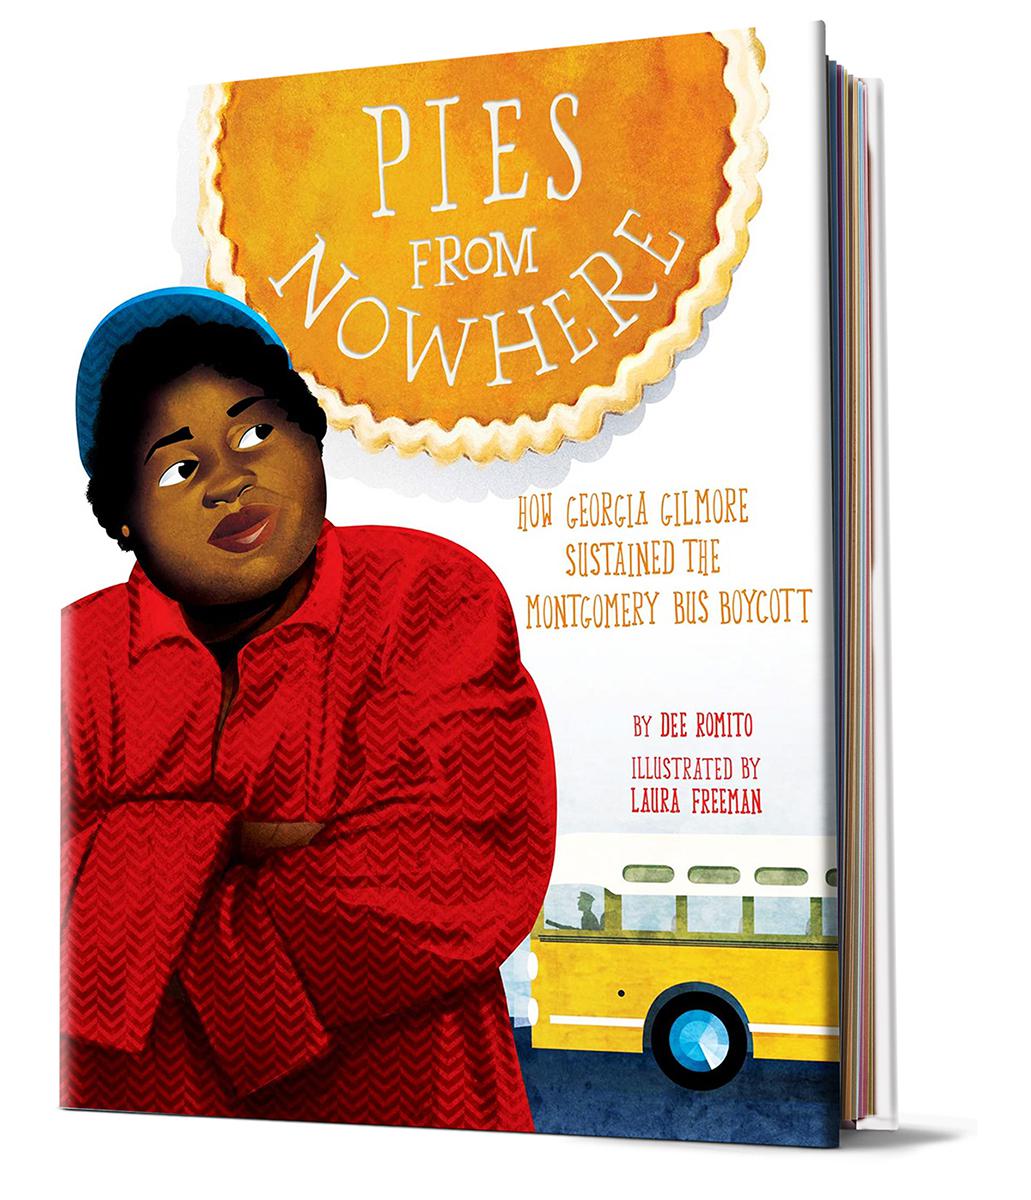  Pies from Nowhere: How Georgia Gilmore Sustained the Montgomery Bus Boycott